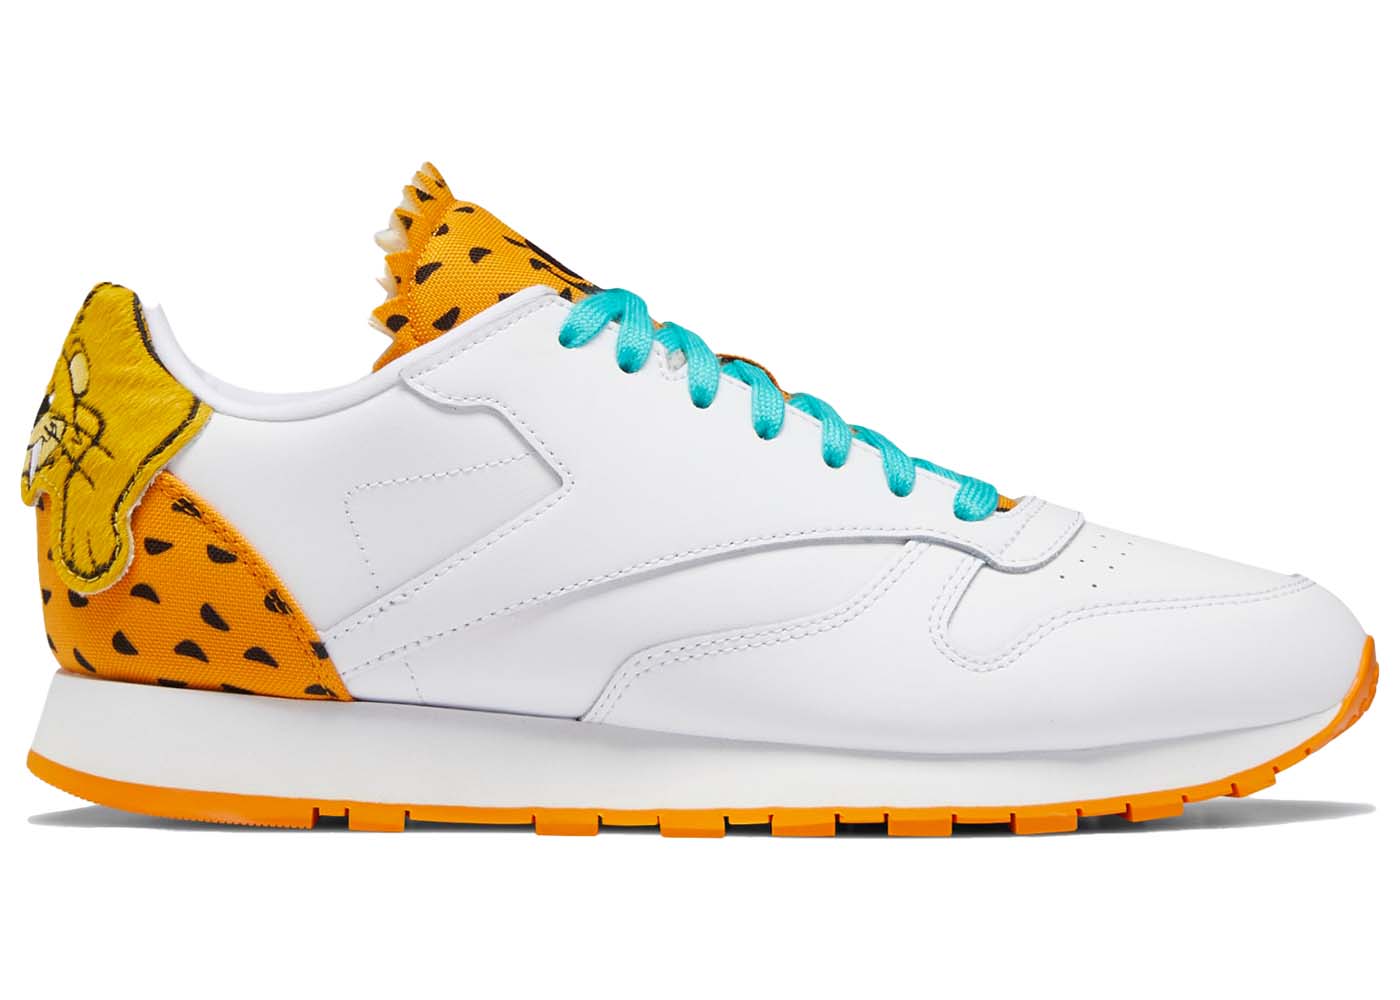 Reebok Classic Leather Anuel AA The Sky Above The Street Men's